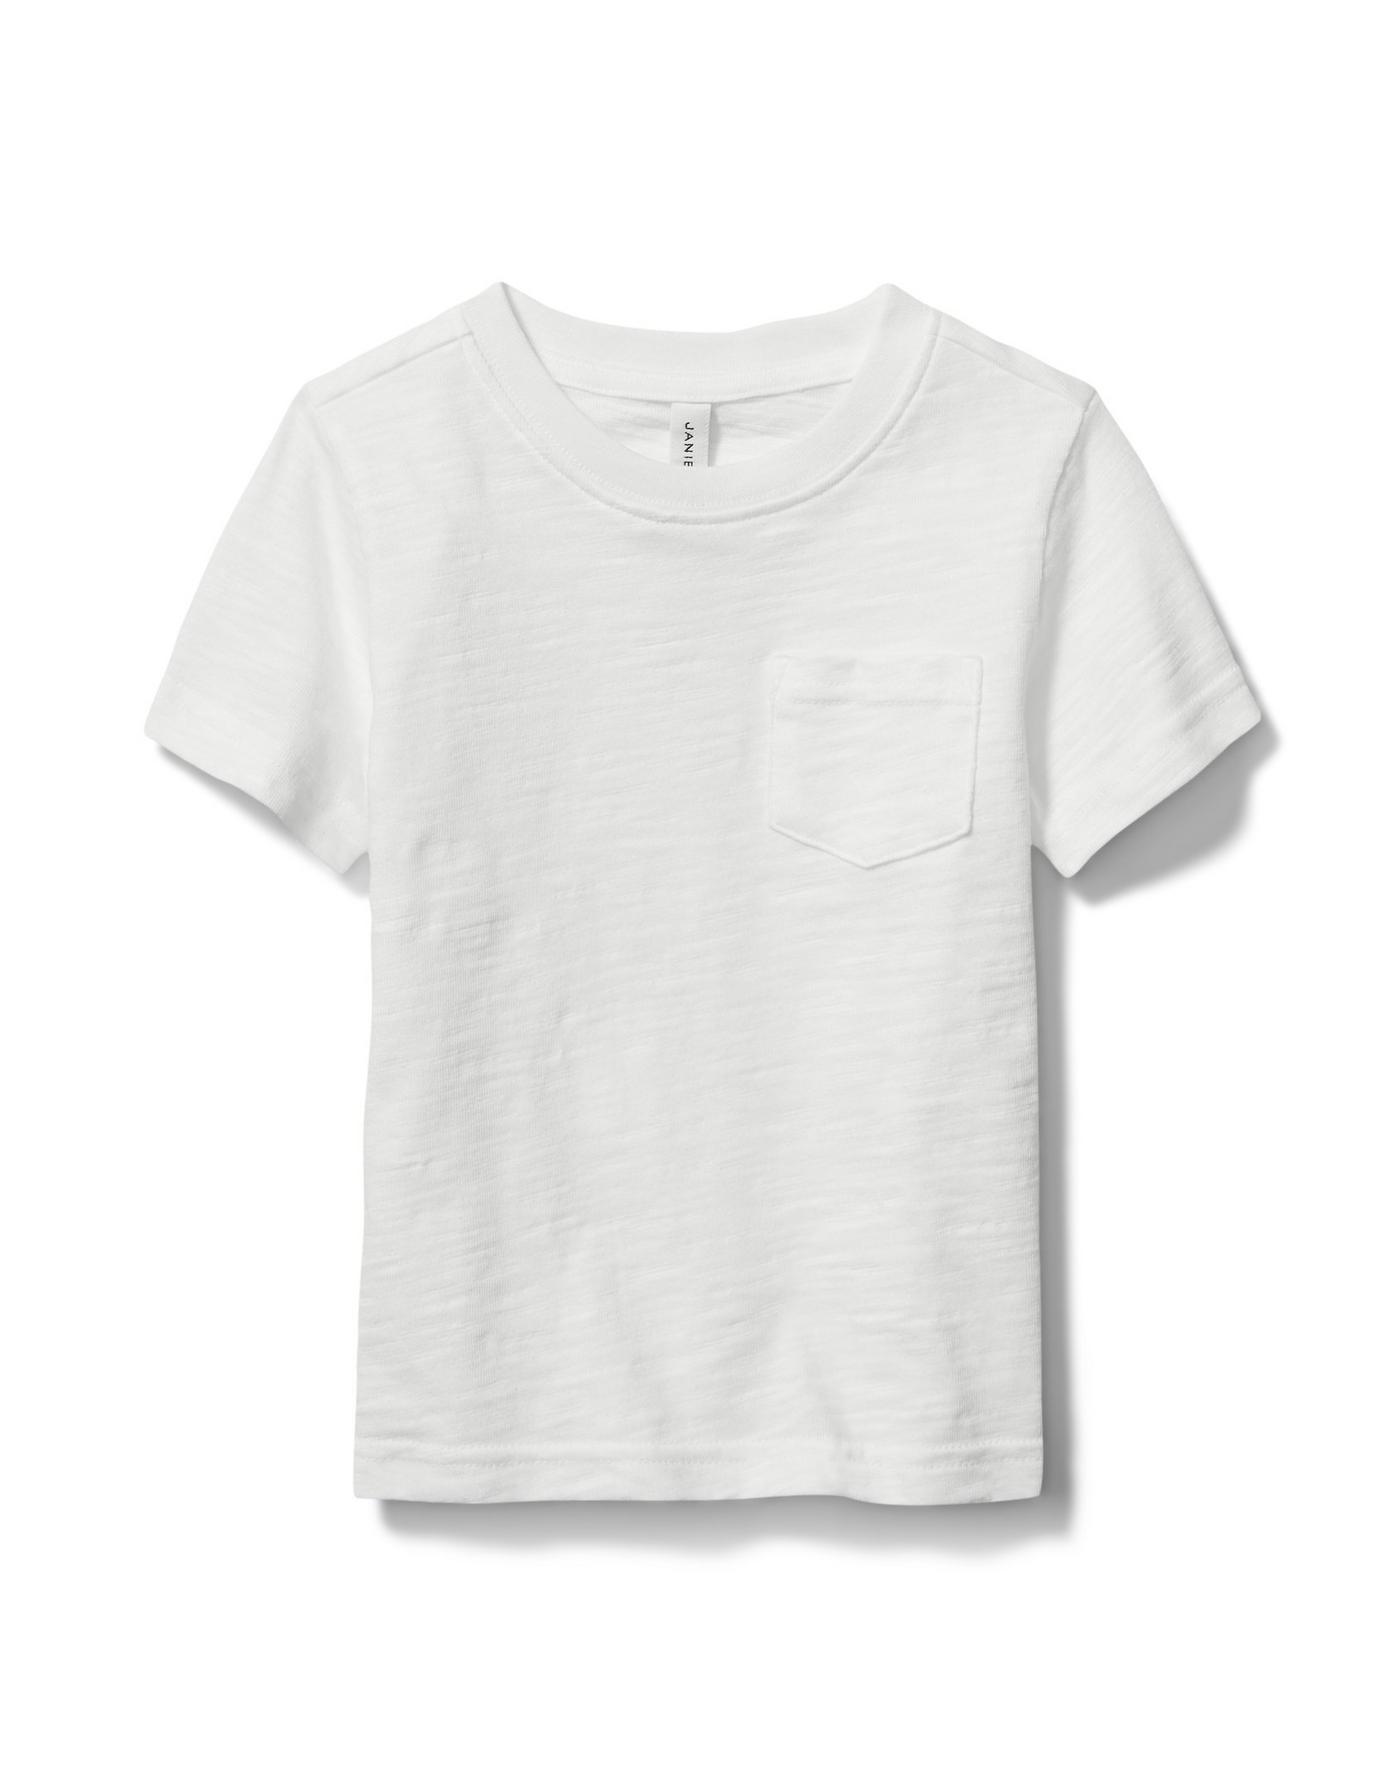 boy and girl matching spring outfits, boys white pocket tee